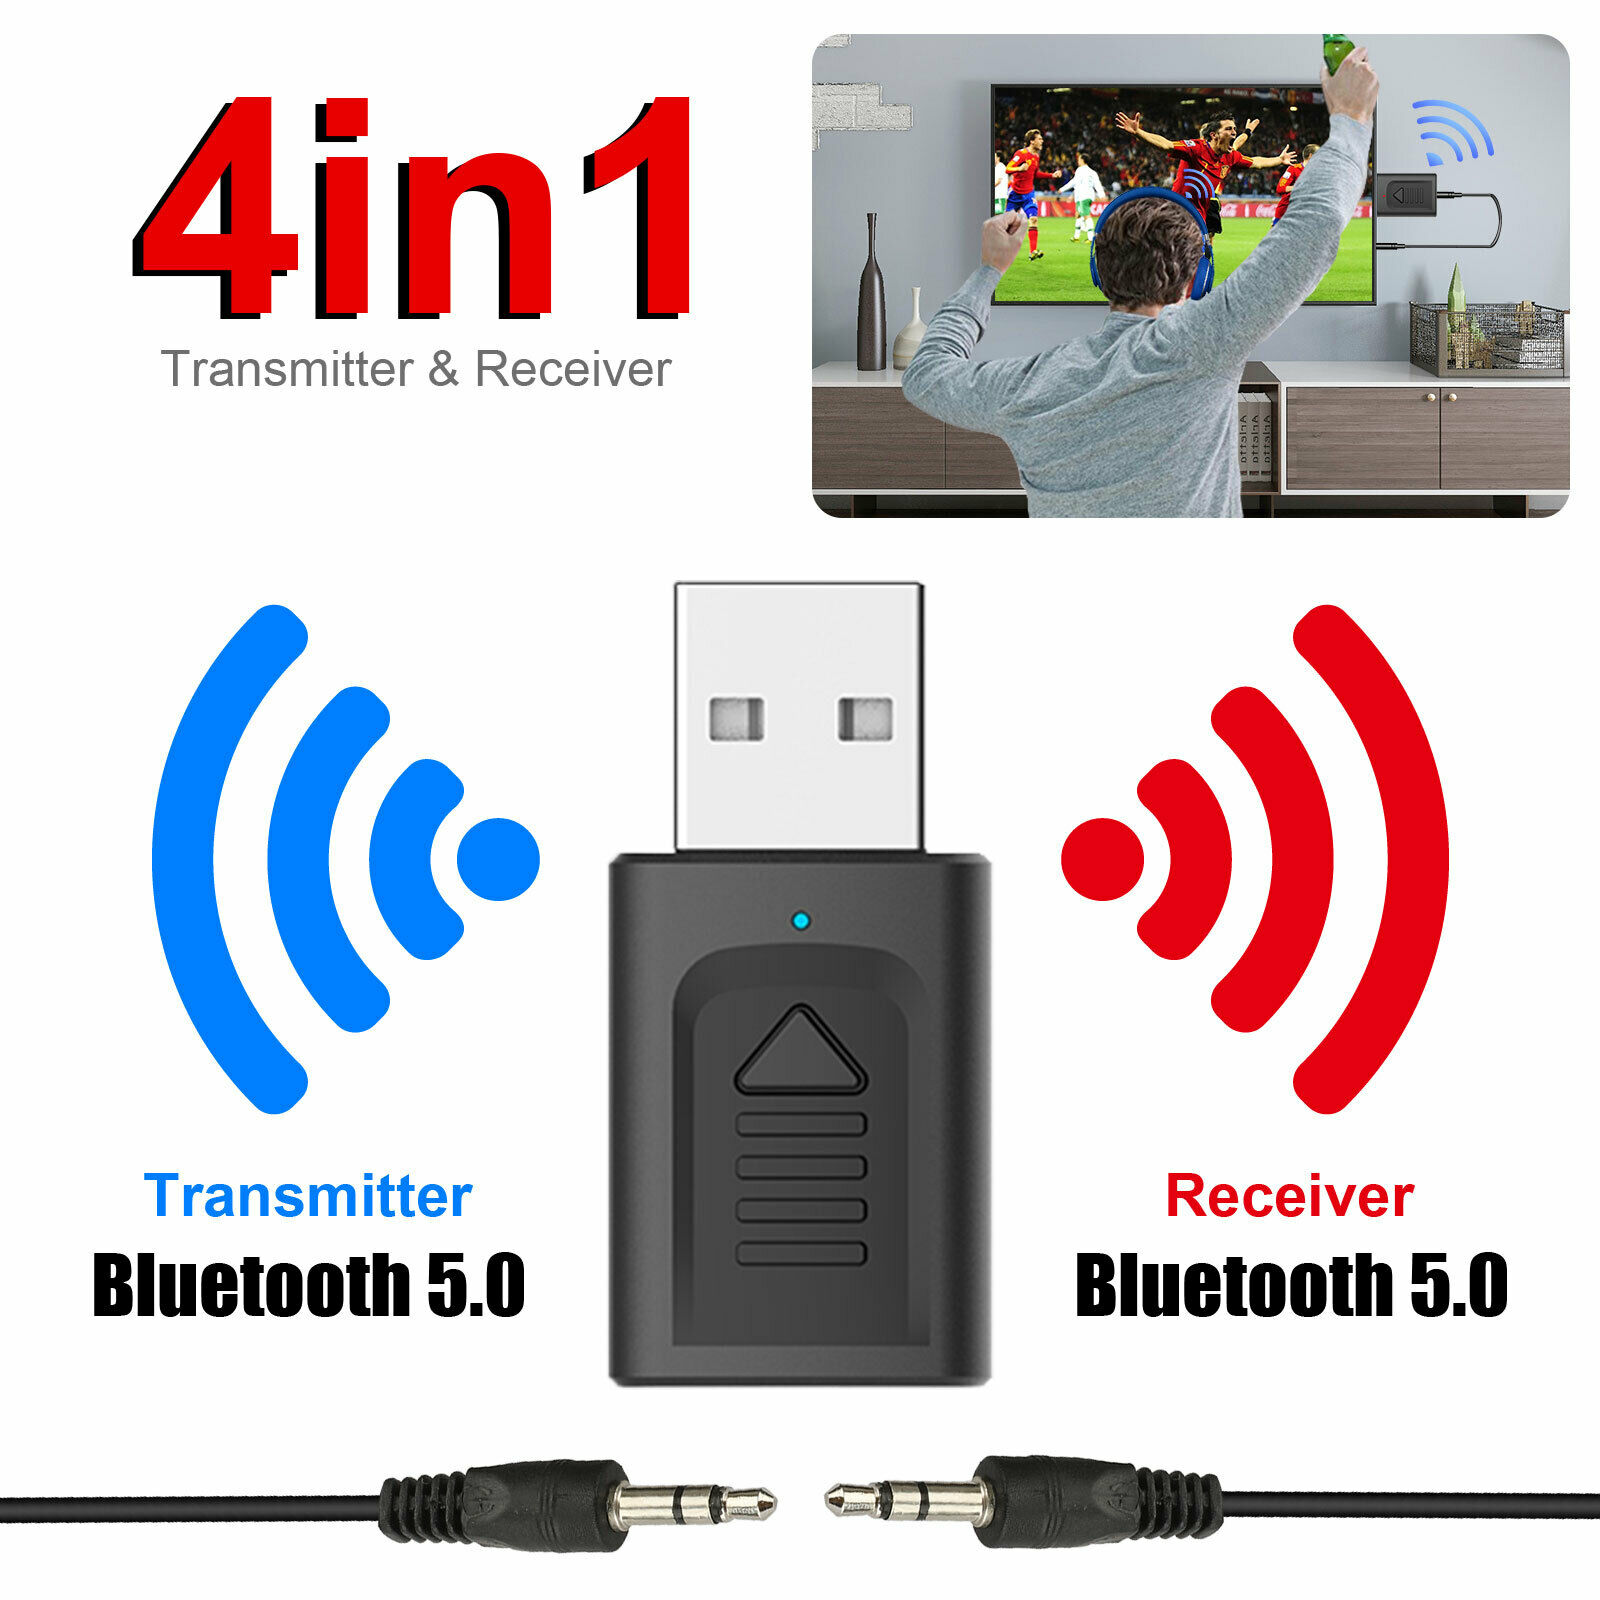 SafeTrip USB Bluetooth 5.0 Transmitter and Receiver For PC TV Car Nintendo Switch